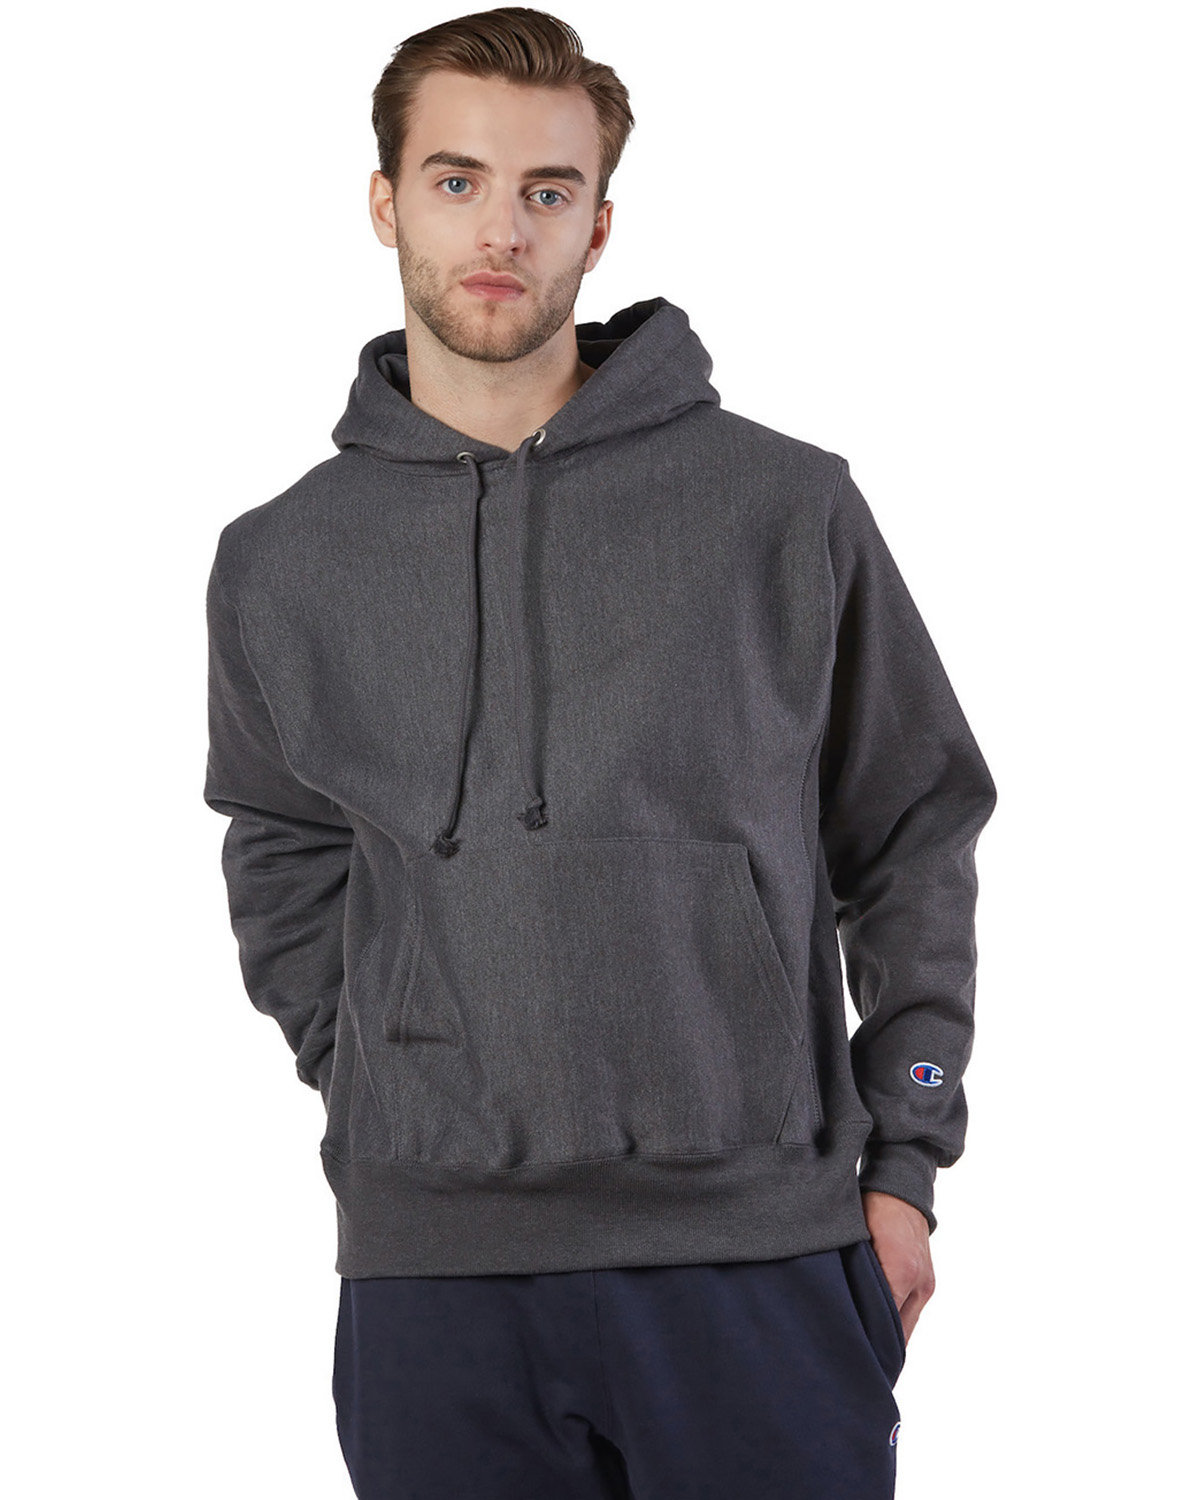 Champion Reverse Weave® Pullover Hooded Sweatshirt CHARCOAL HEATHER 